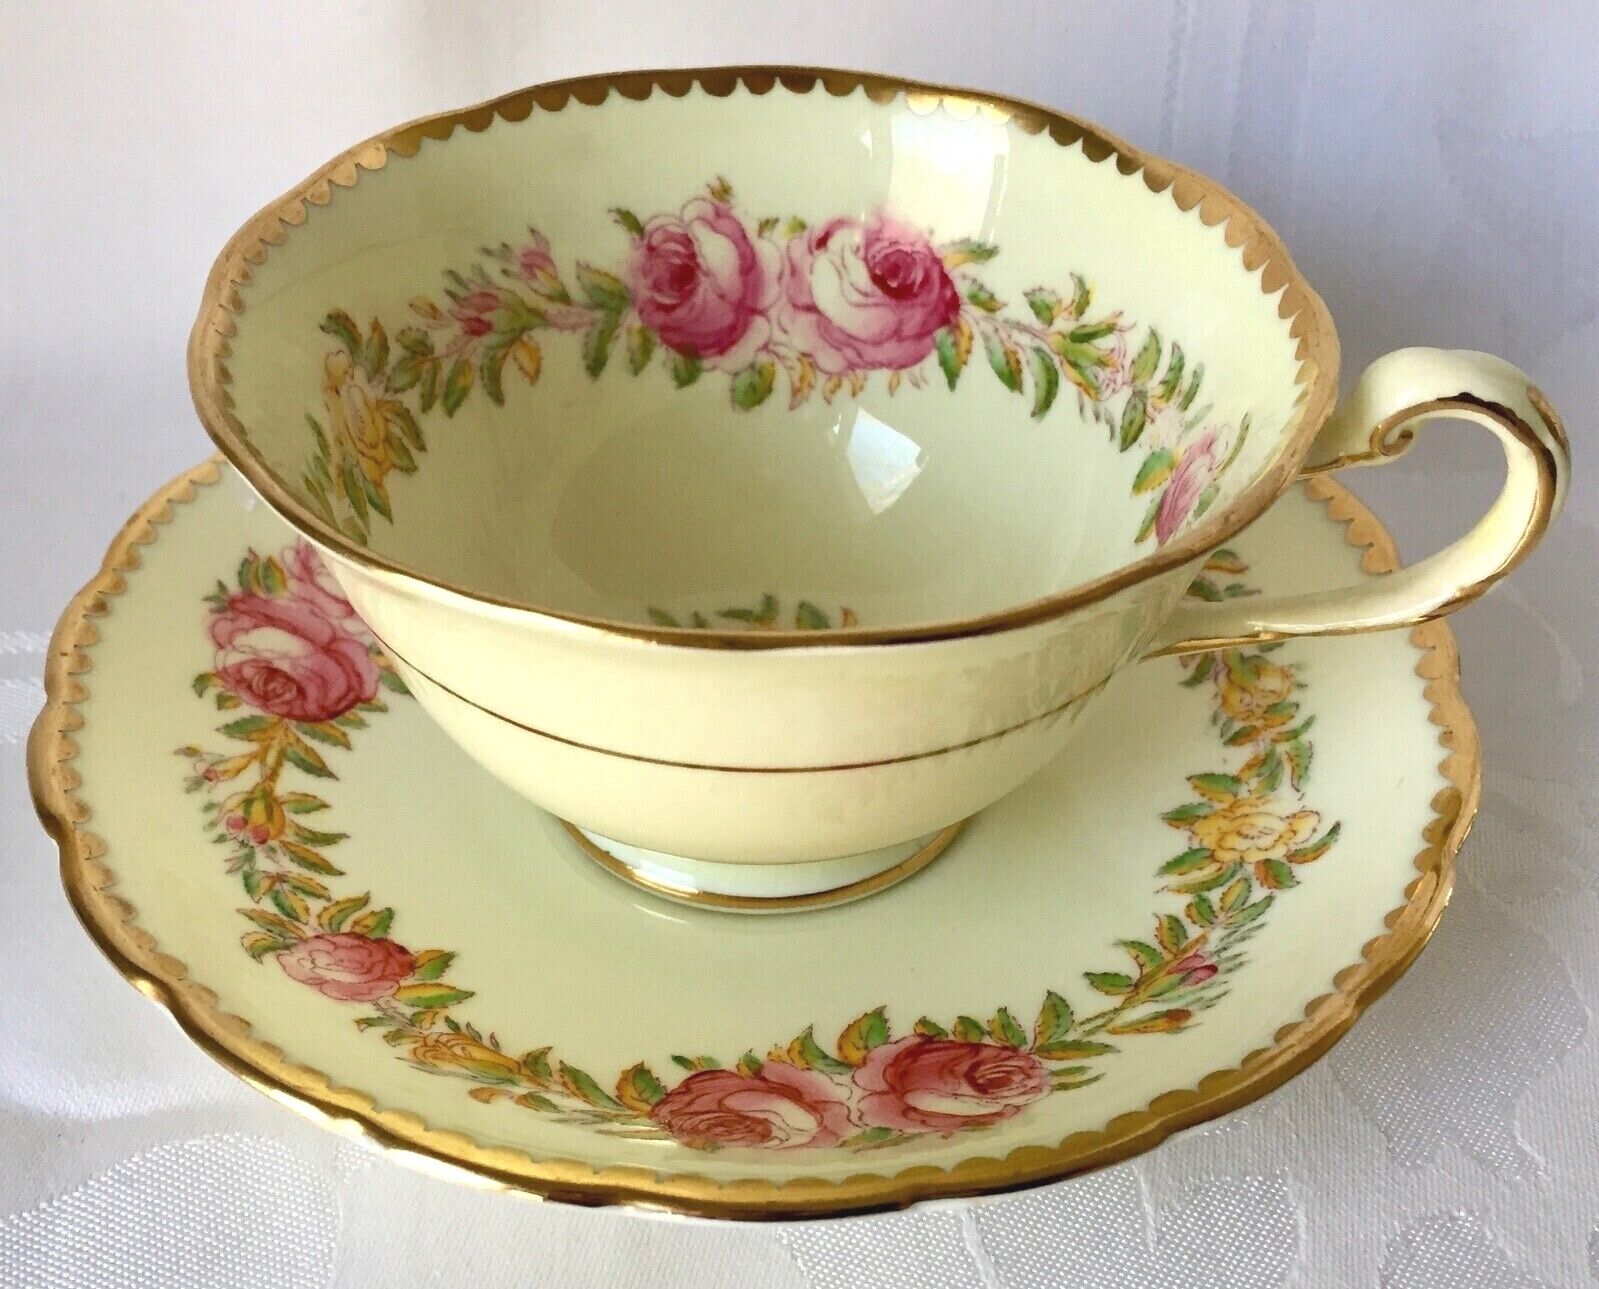 RARE NEW CHELSEA STAFFS YELLOW CUP & SAUCER, PINK ROSES, 5952, ROYAL CHELSEA